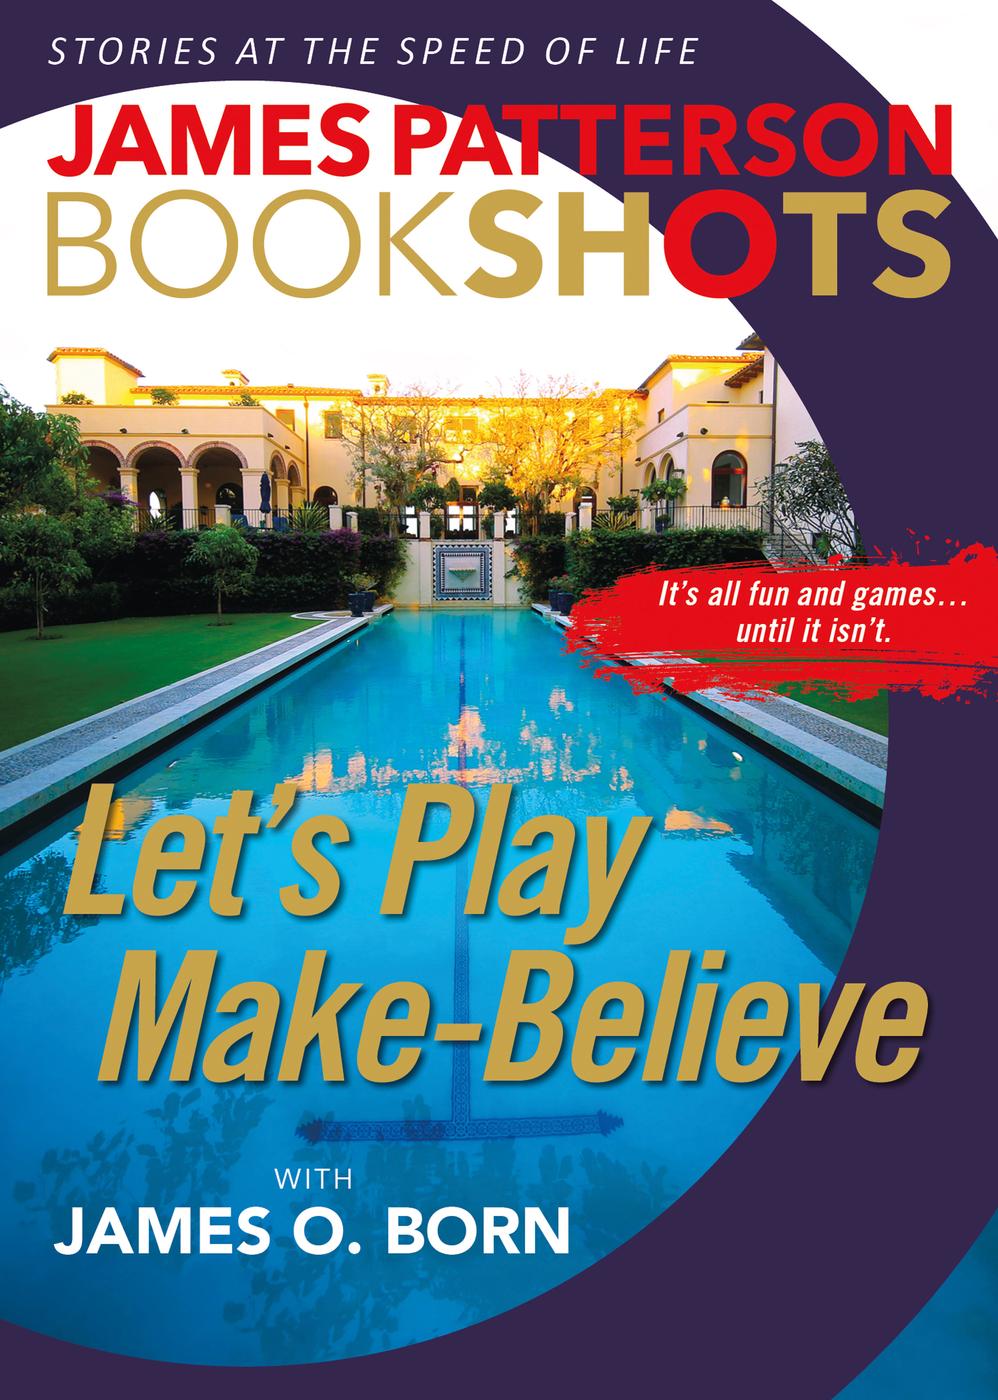 Let's Play Make-Believe (2016) by James Patterson